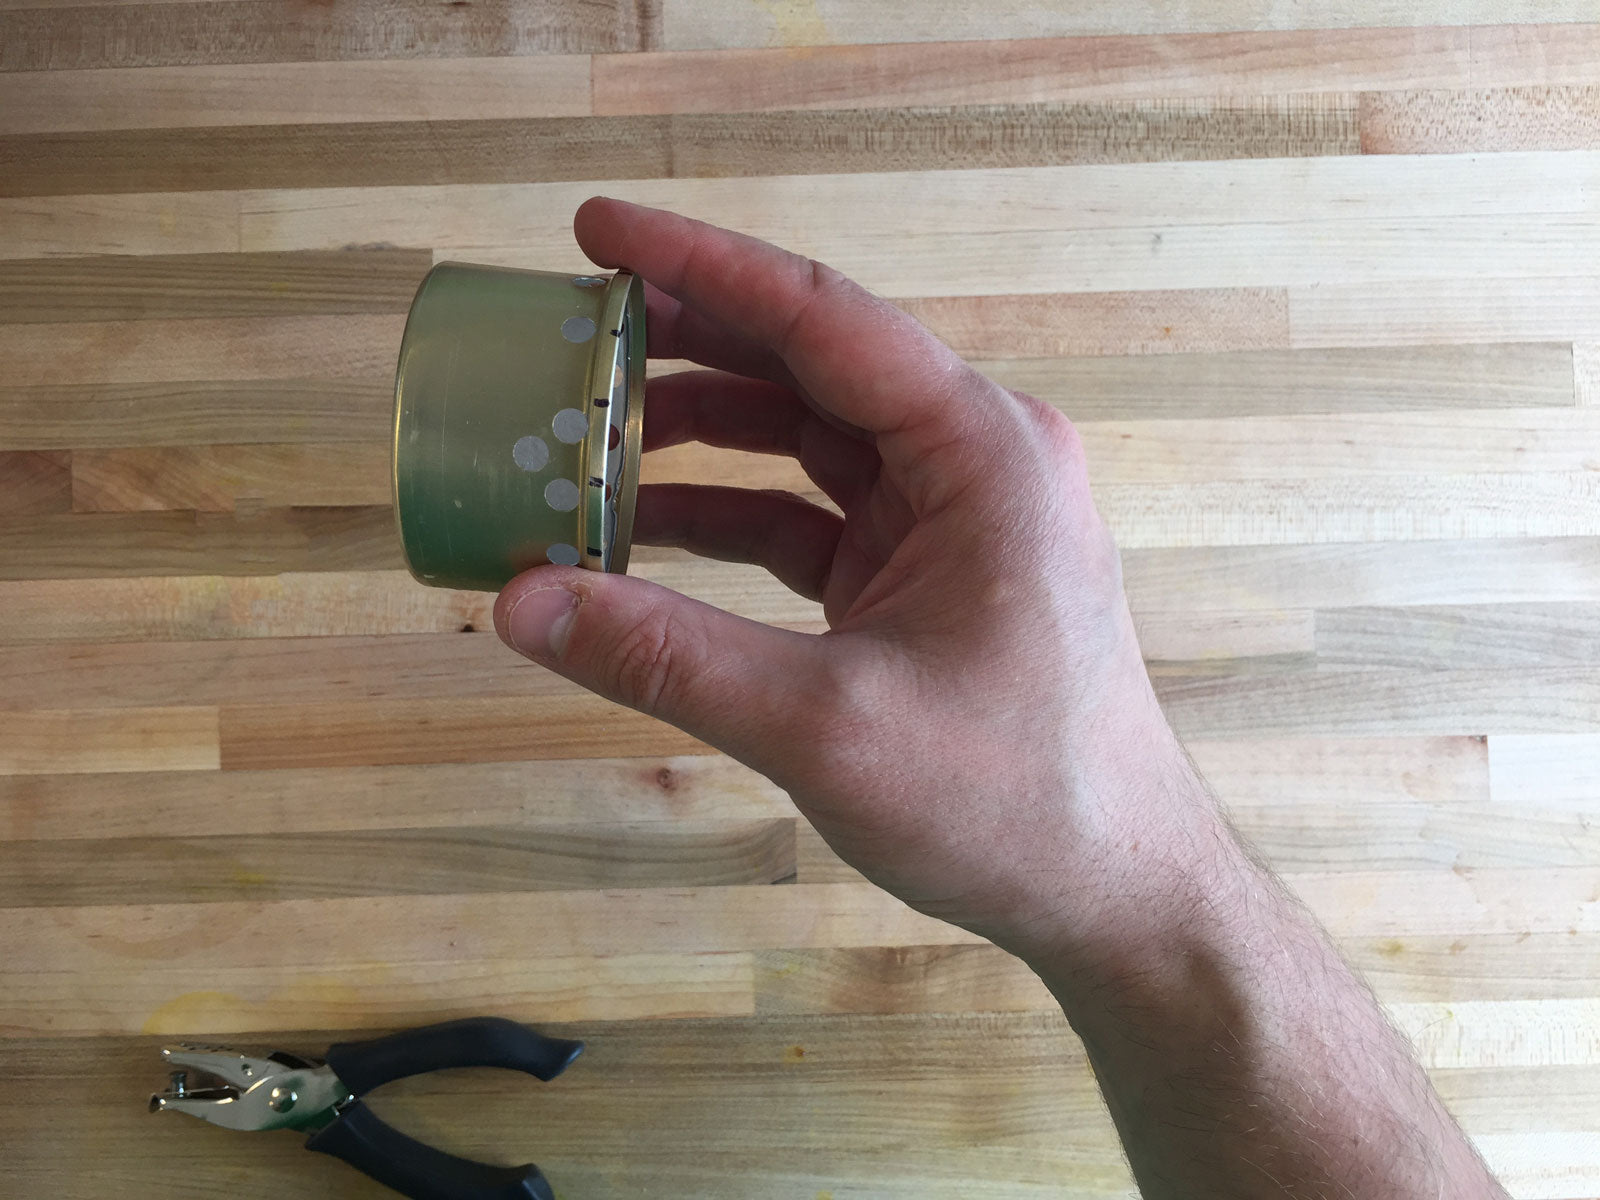 How to Make a Backpacking Stove with a Cat Food Can and a Hole Punch